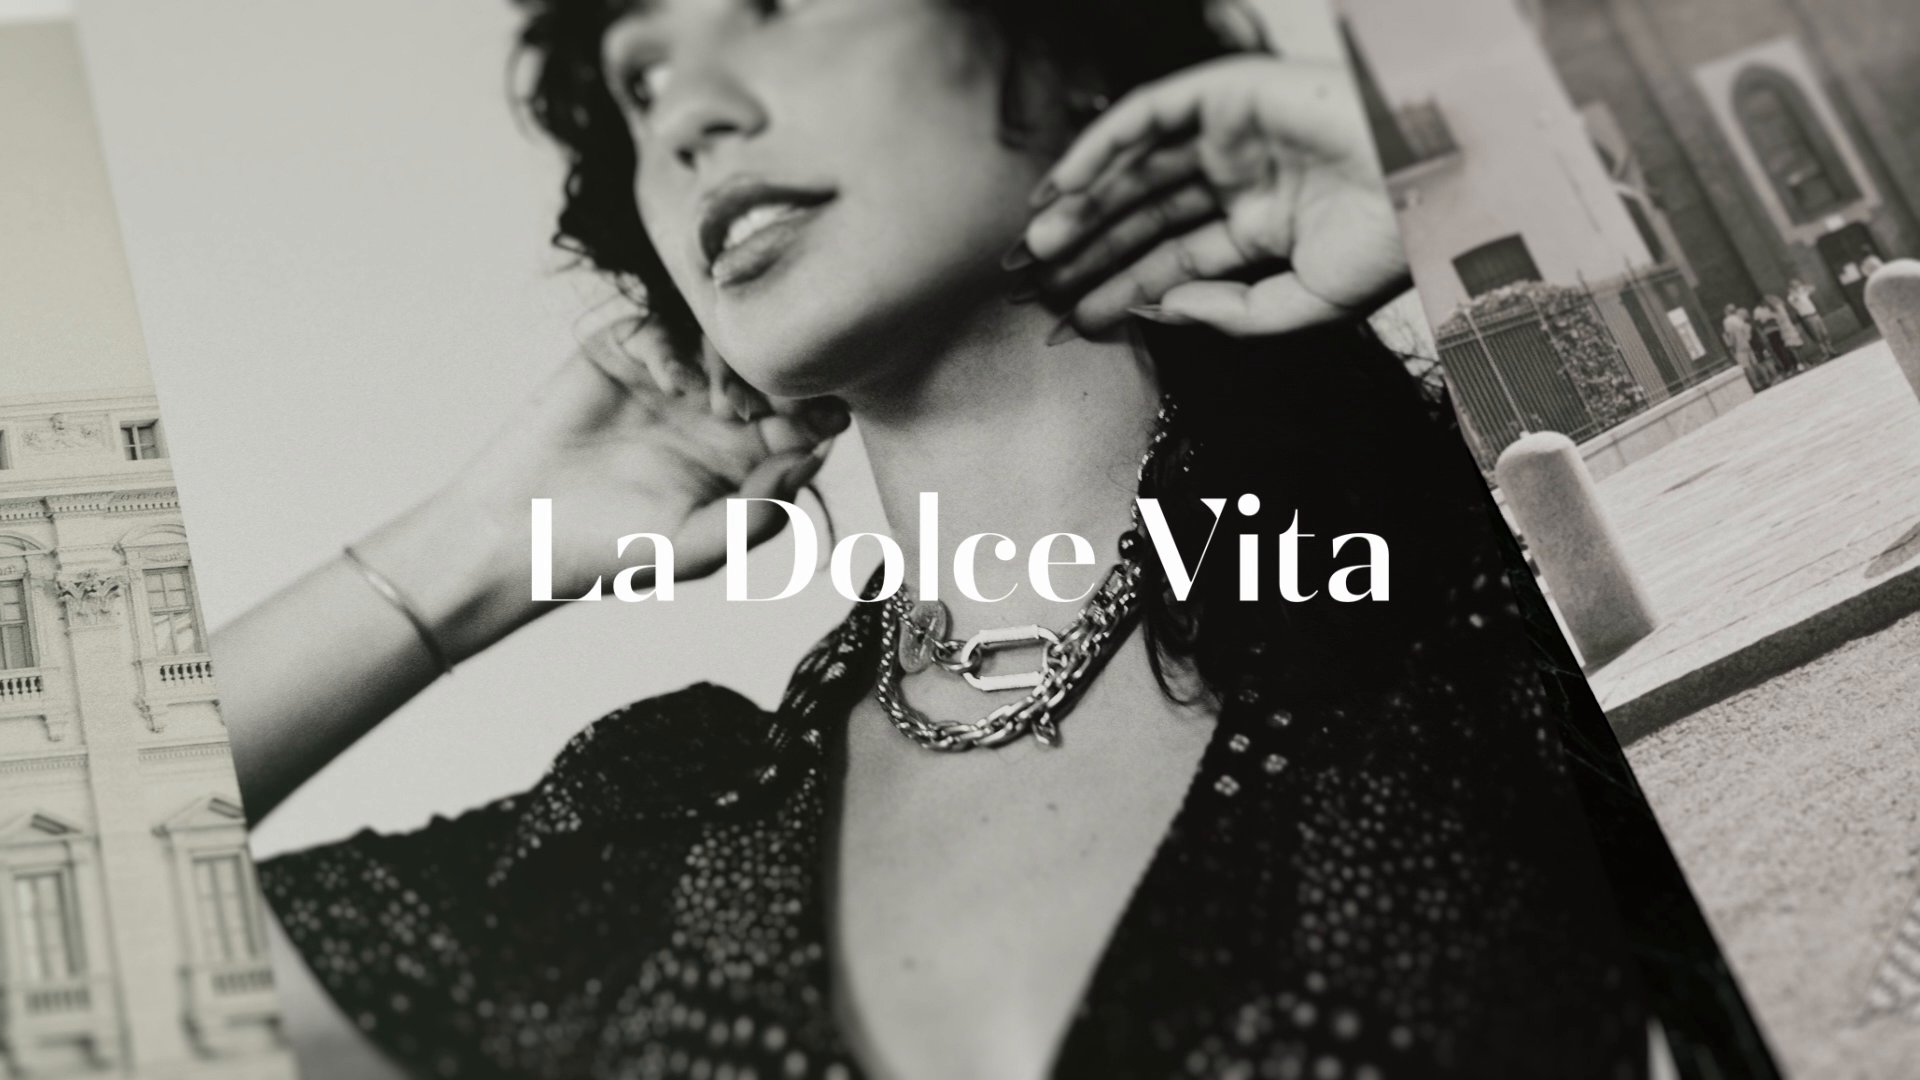 Orient Express makes a grand return to Italy with La Dolce Vita